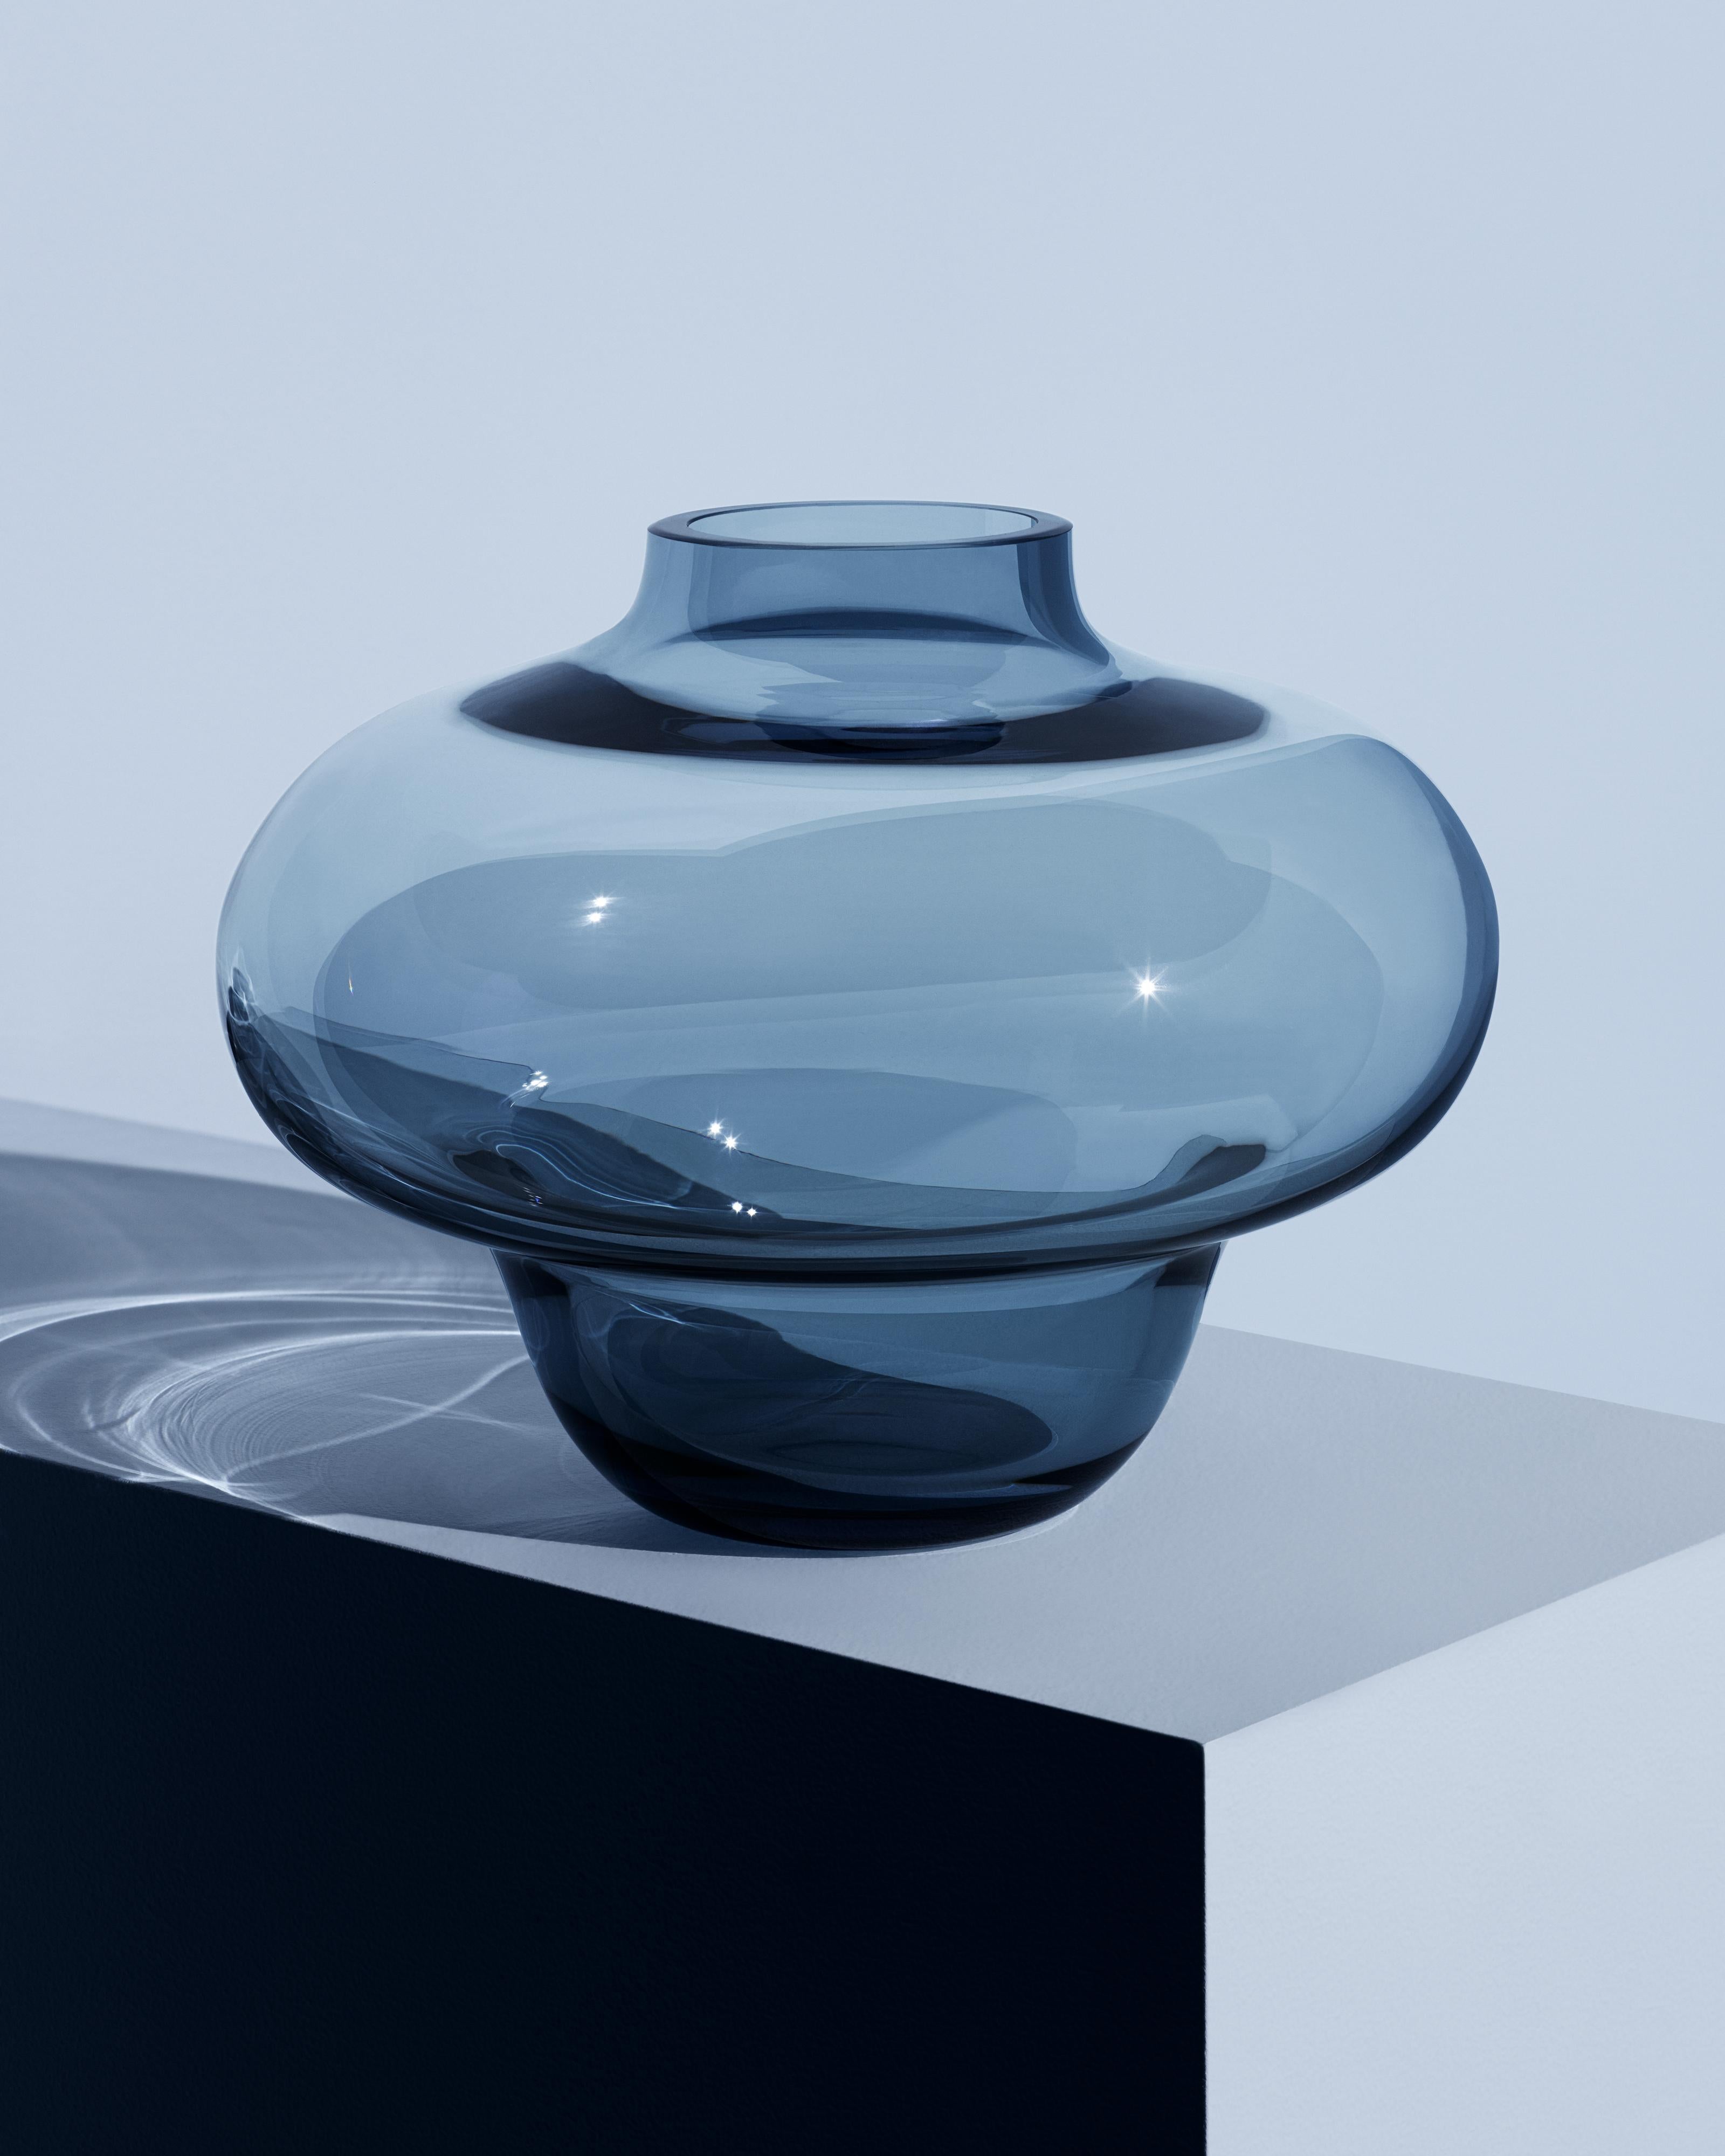 Kappa Circular from Kosta Boda is made of 100 percent circular glass from Kosta Glassworks in Sweden. Small bubbles and color variations often appear in the process of transforming circular glass into new products. This makes each vase unique,